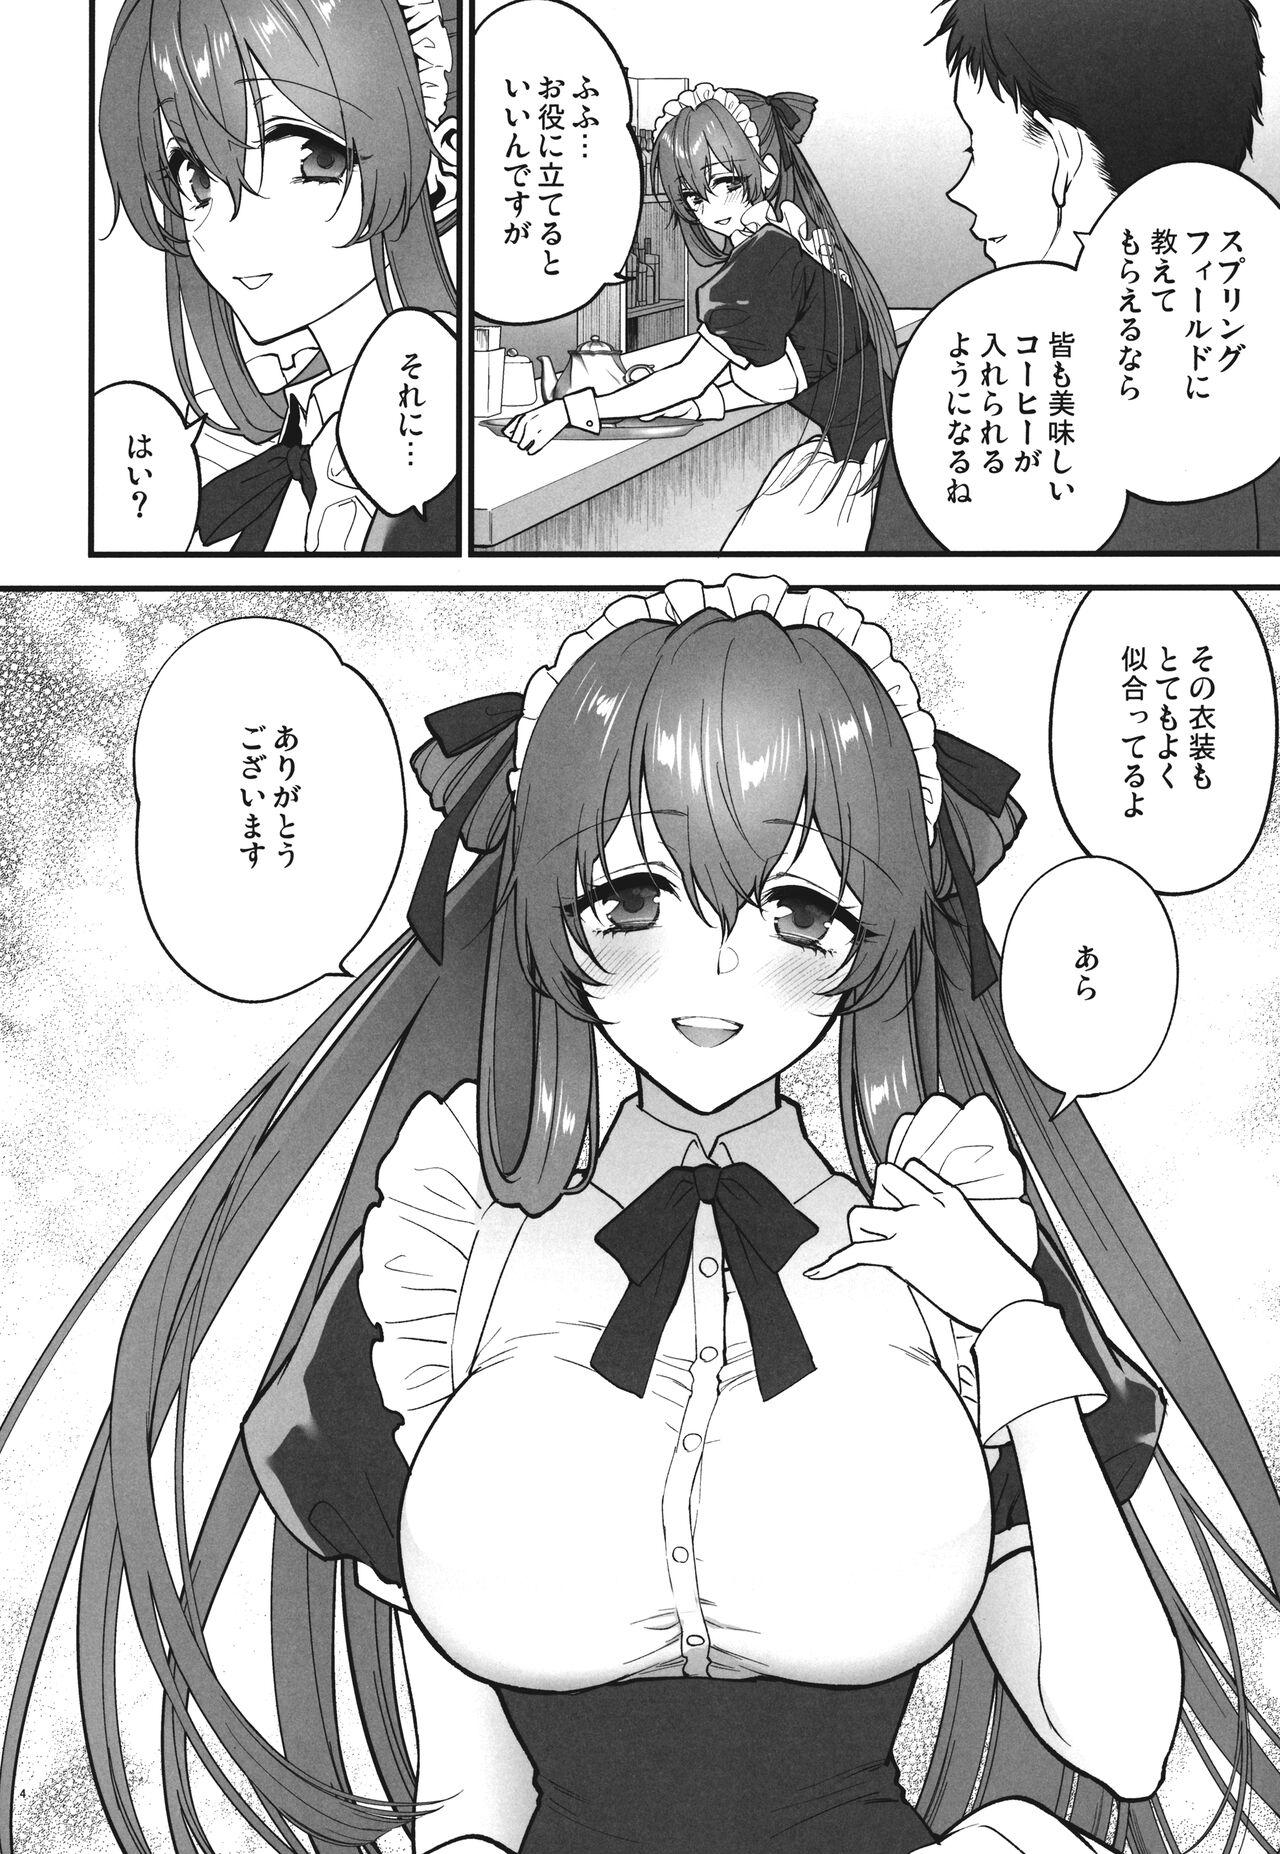 Lady Make me Yours - Girls frontline Hard Cock - Page 3